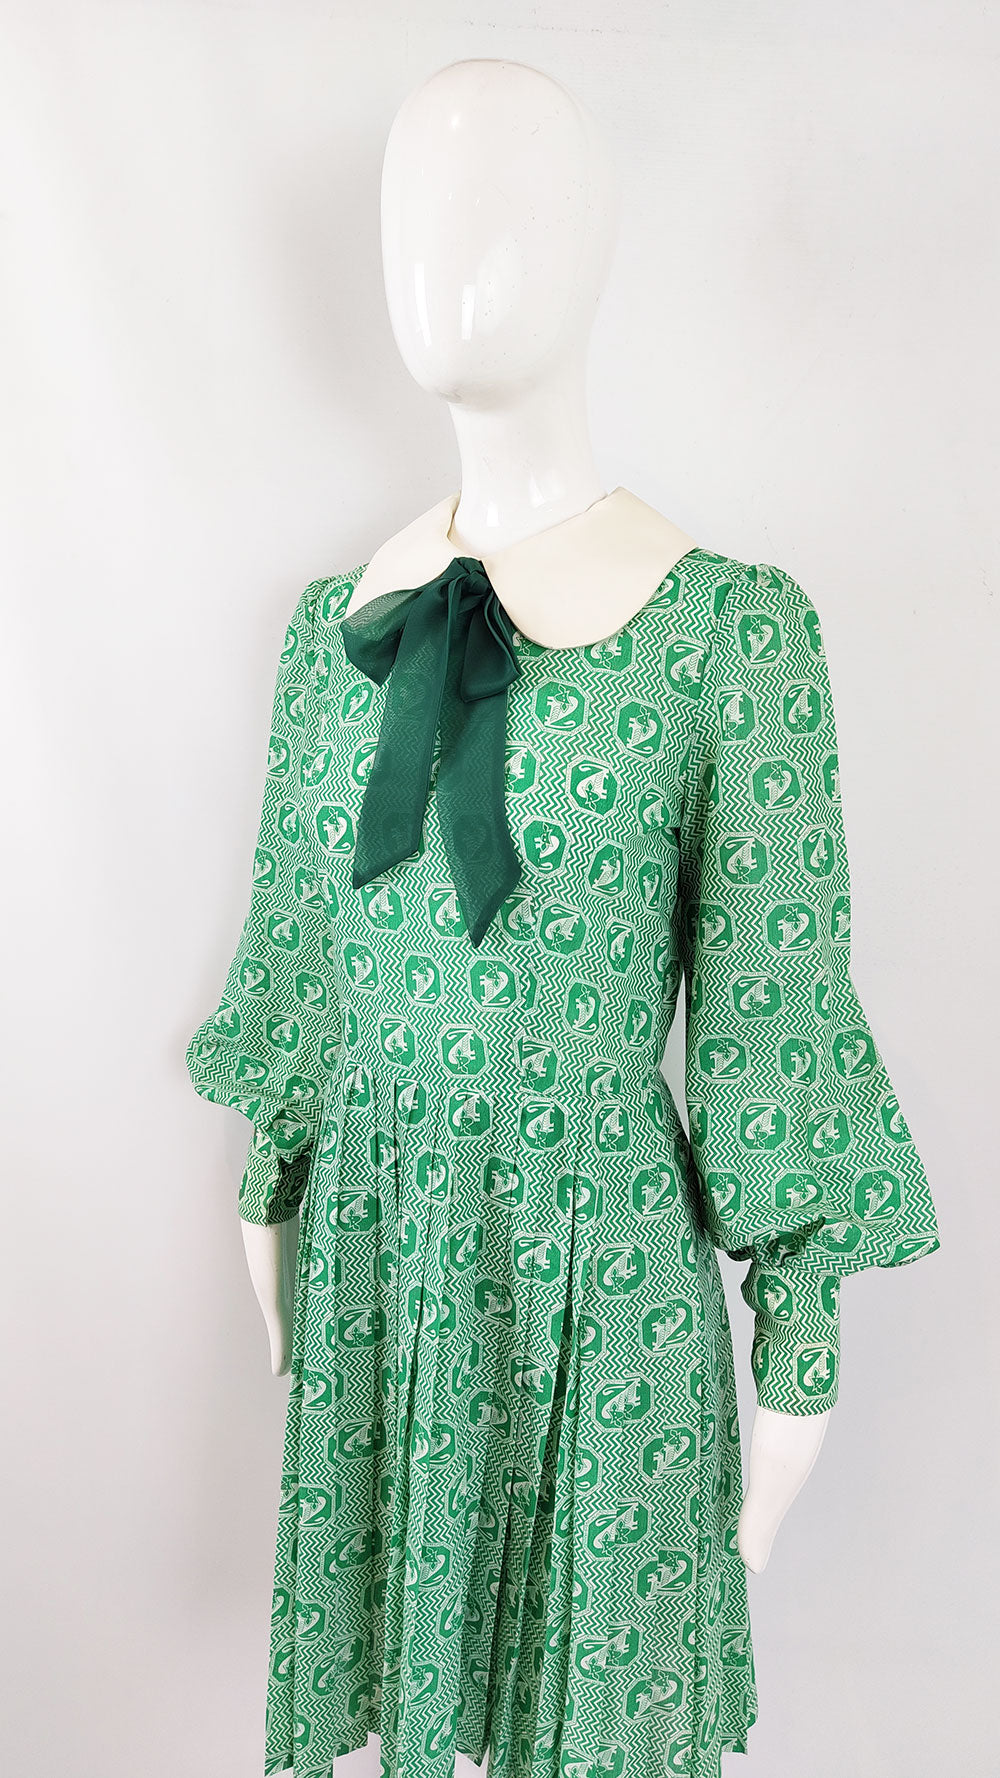 A green and white kawaii vintage dress by Jean allen with large puffed sleeves and a mod style collar.